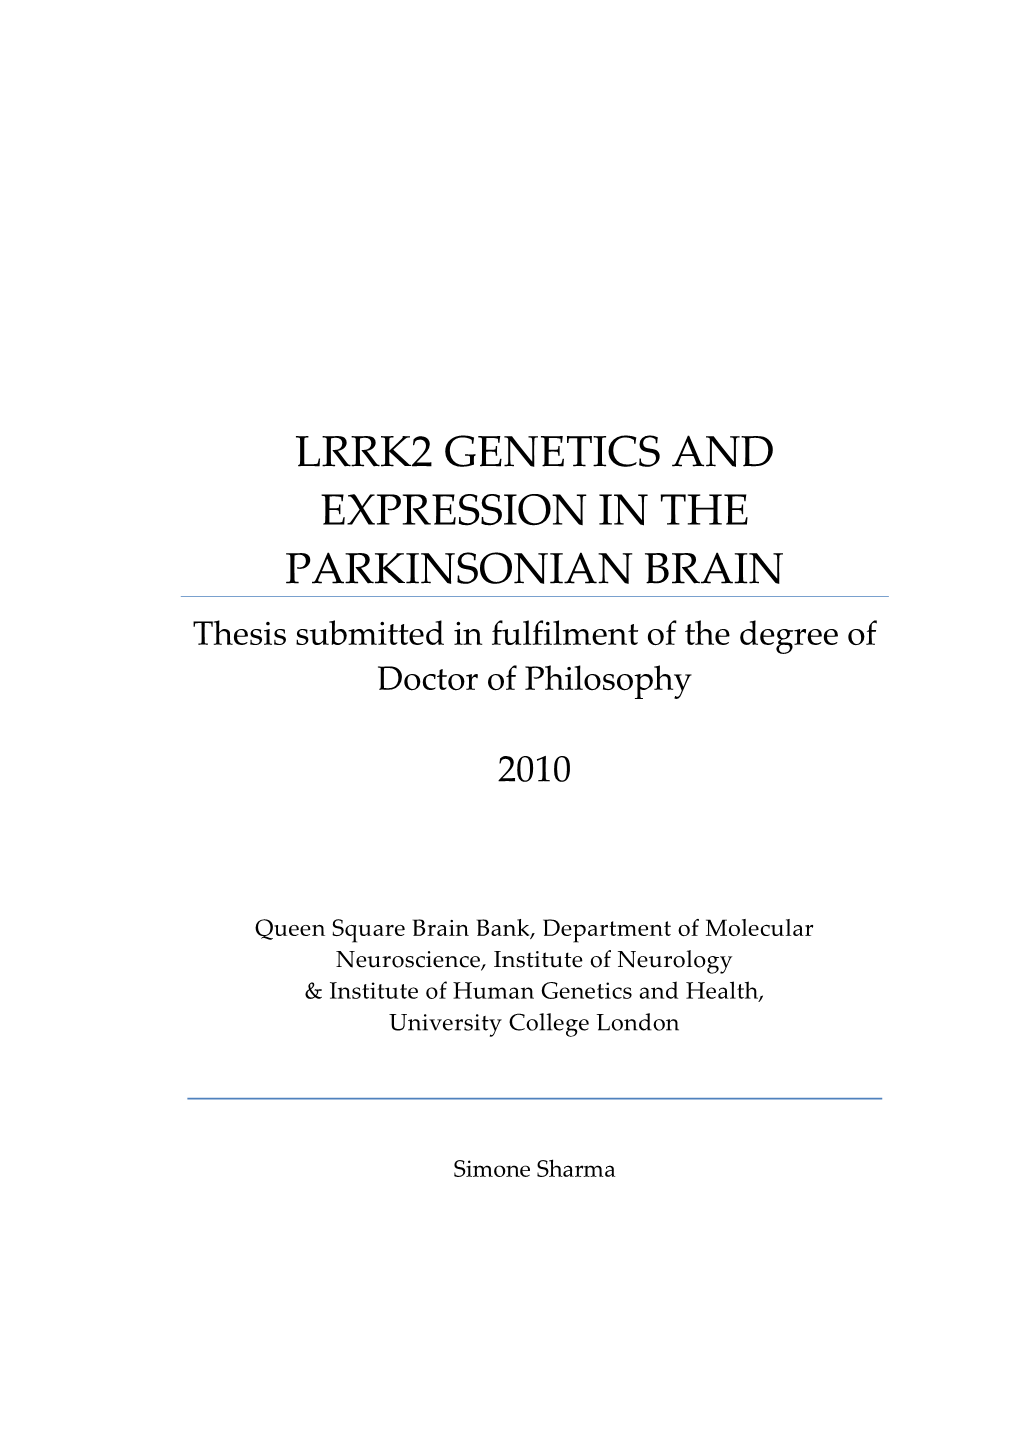 LRRK2 GENETICS and EXPRESSION in the PARKINSONIAN BRAIN Thesis Submitted in Fulfilment of the Degree of Doctor of Philosophy